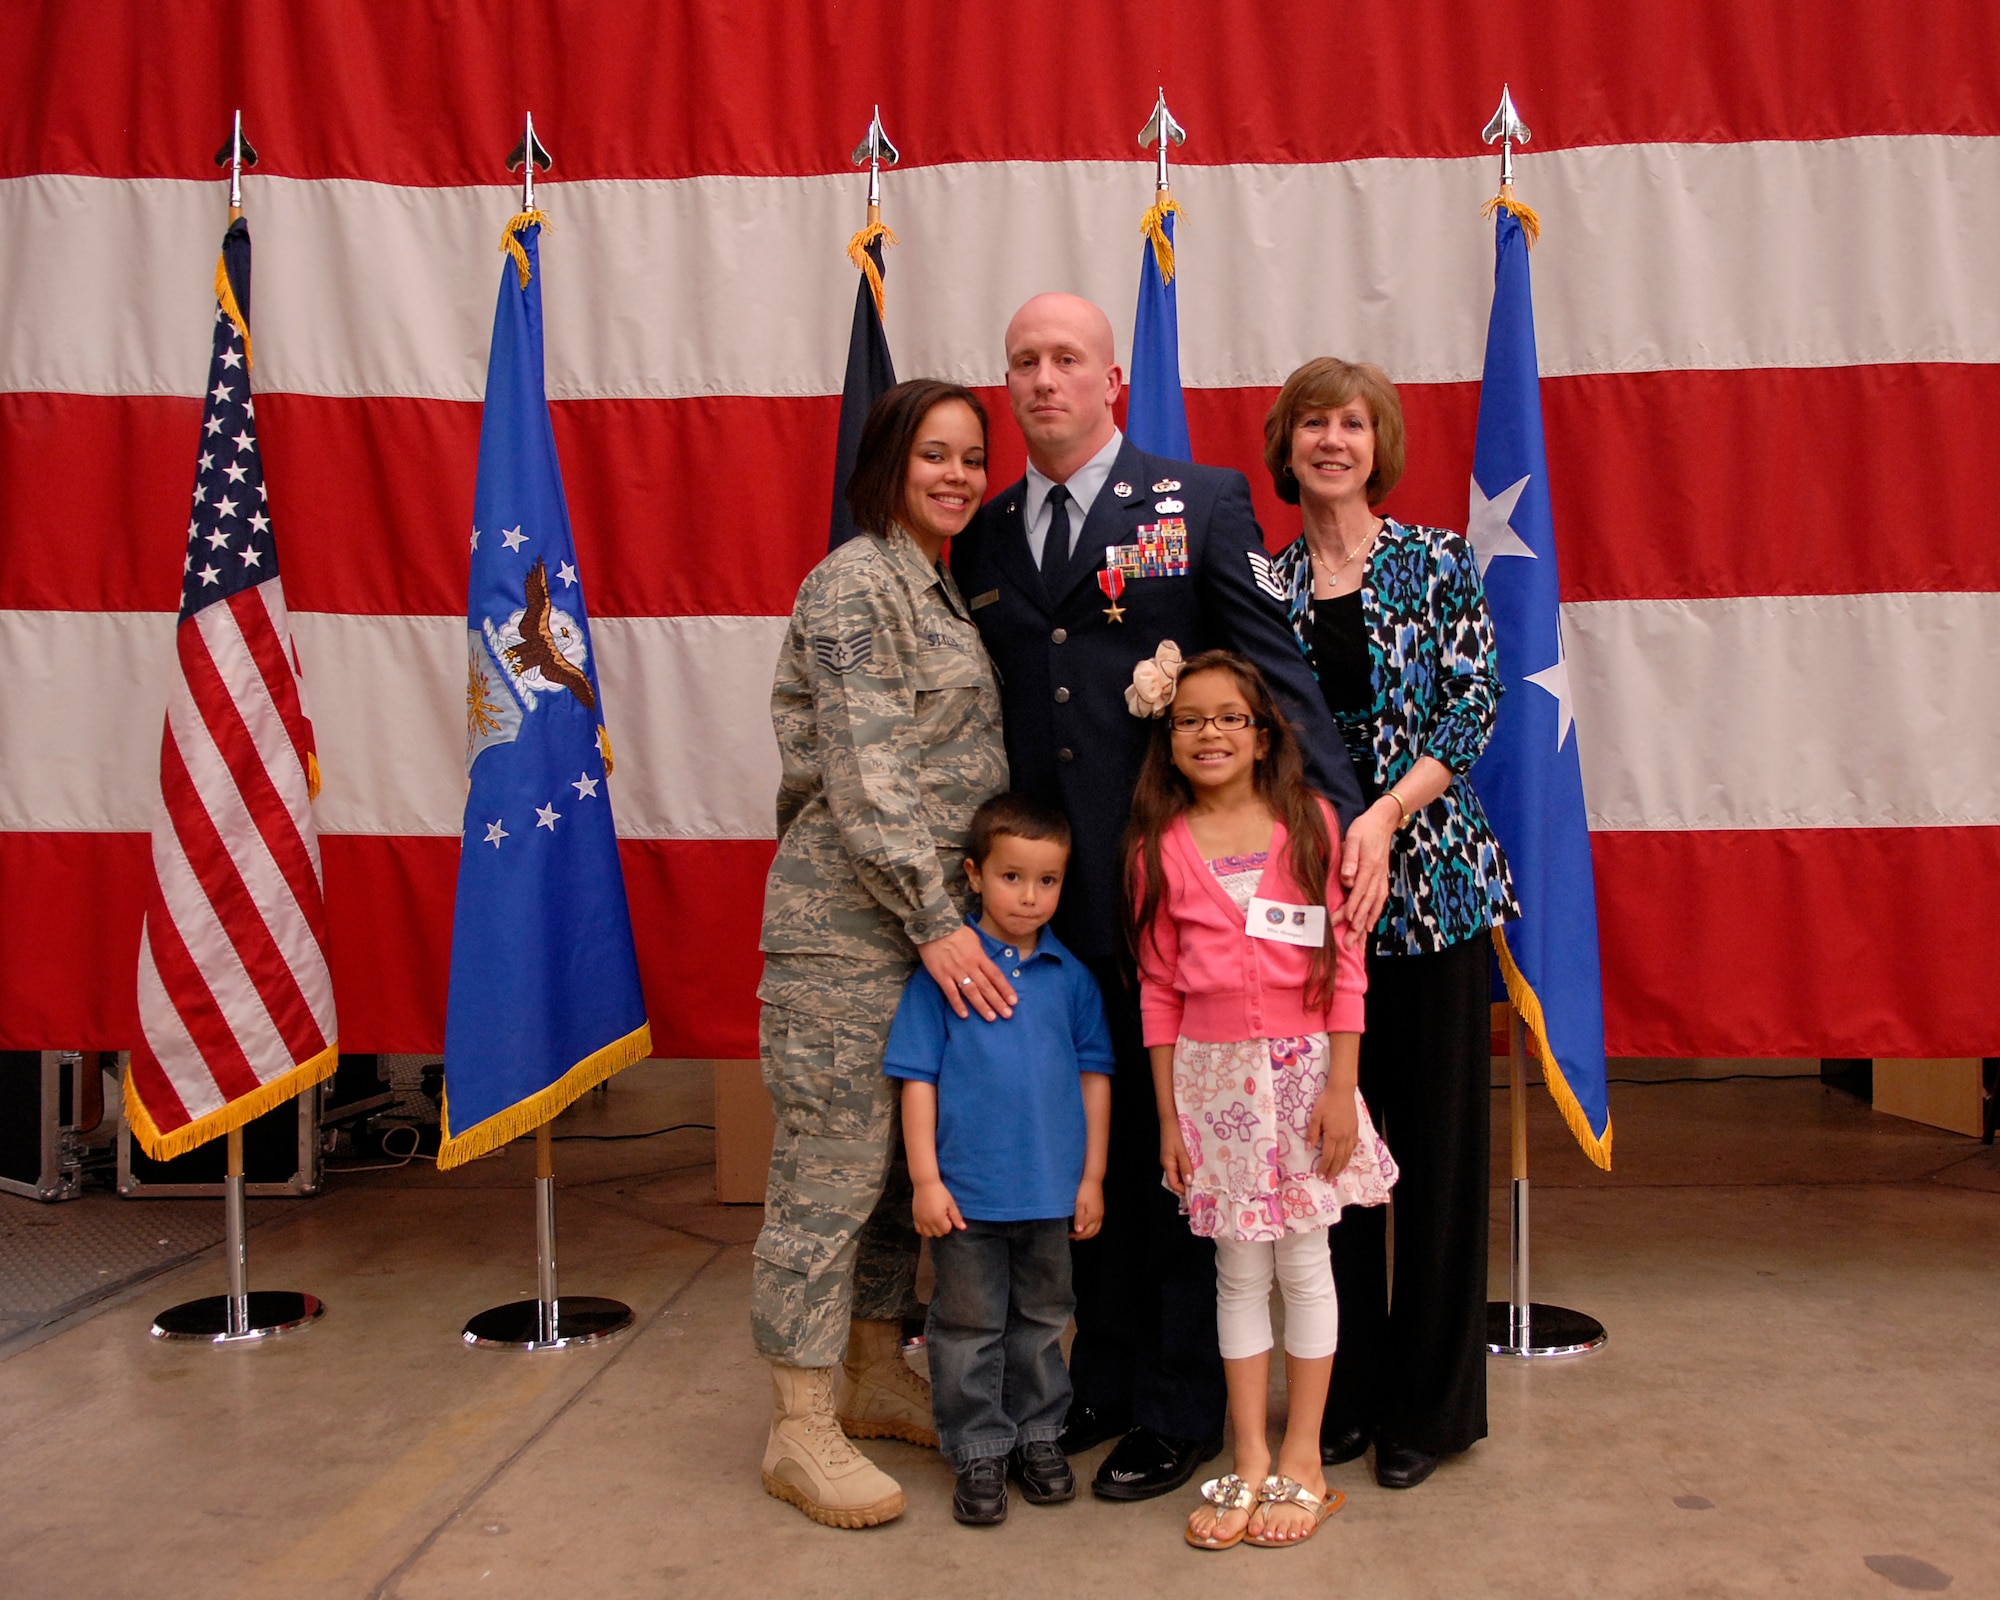 VANDENBERG AIR FORCE BASE, Calif. - Tech. Sgt. Richard Styles, from the 614th Air and Space  Operations Center, enjoys a moment with his mother, Amy, wife, Staff Sgt. Jessica Styles, daughter, Monique, and son, Aiden, following a ceremony in which Lt. Gen. Susan Helms, Joint Functional Component Command for Space and 14th Air Force Commander, presented him with a Bronze Star Medal on Tuesday, April 5, 2011. Sergeant Styles was deployed from May to October 2010 as an intelligence analyst in both Iraq and Afghanistan. While in Iraq, he served with a Joint Special Operations Task Force and led 68 outside-the-wire collection missions. He is also credited with working with international security and coalition partners to identify more than a dozen high valued targets and to provide information about a number of key Al-Qaeda networks. While in Afghanistan, Sergeant Styles was a
liaison officer to the International Security Assistance Force and worked
with the government of Afghanistan to help capture several senior Al-Qaeda leaders. (U.S. Air Force photo/Staff Sgt. Andrew M. Satran)